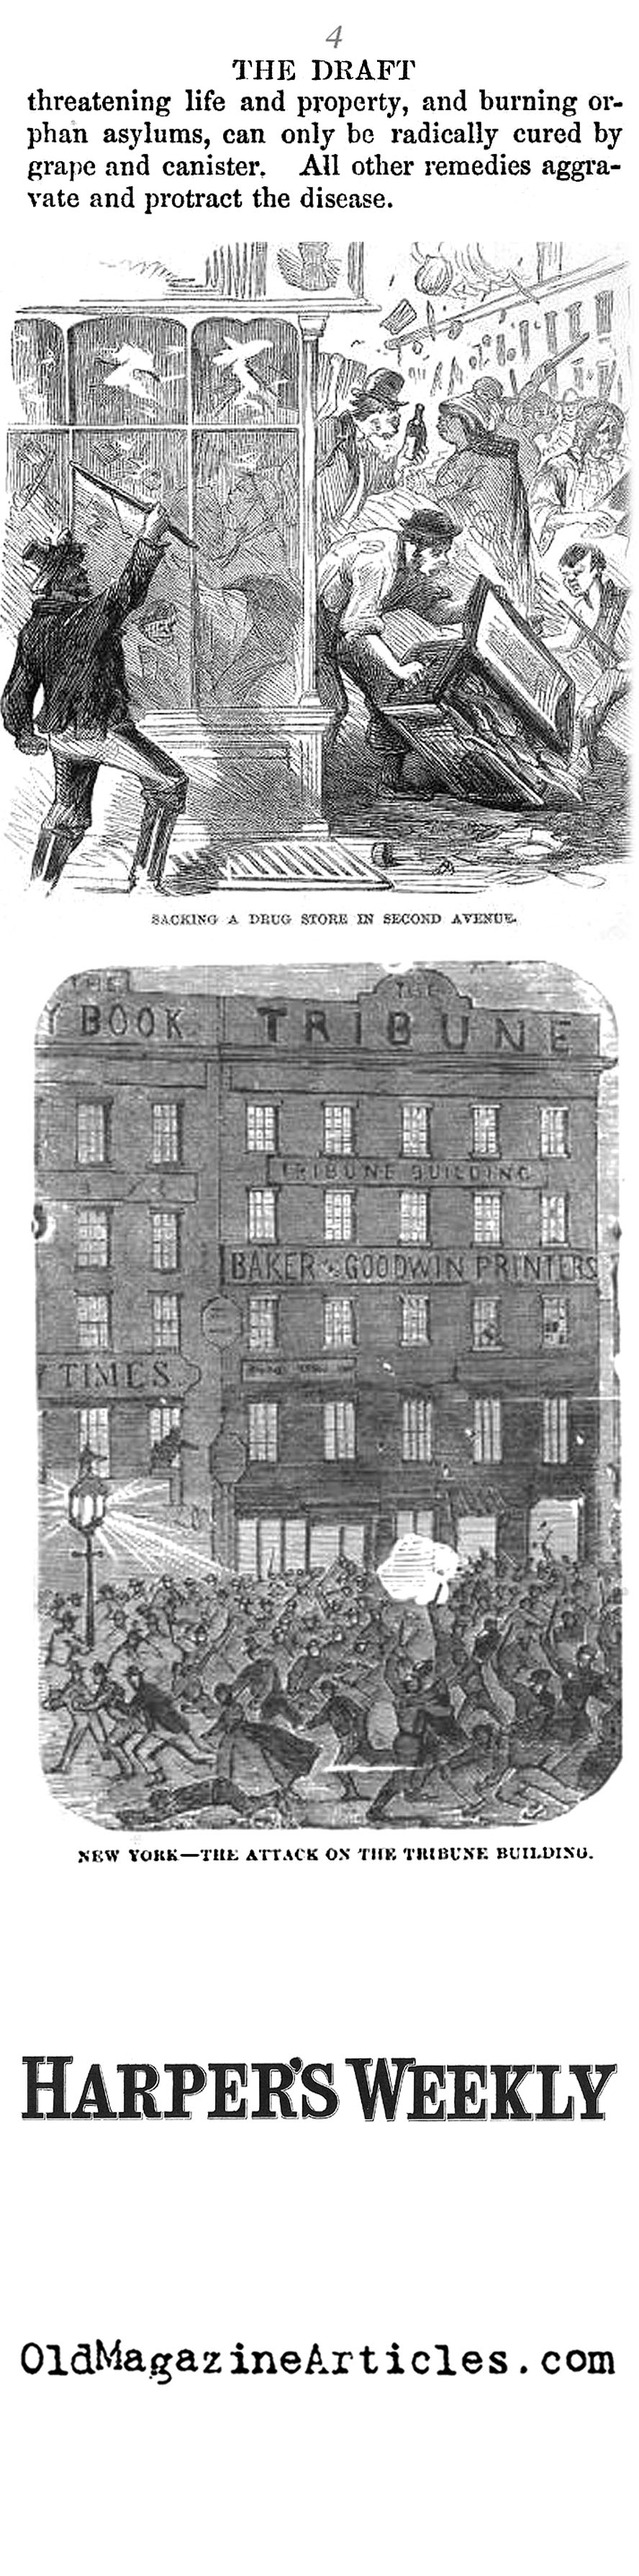 The New York City Draft Riot (Harper's Weekly, 1863)